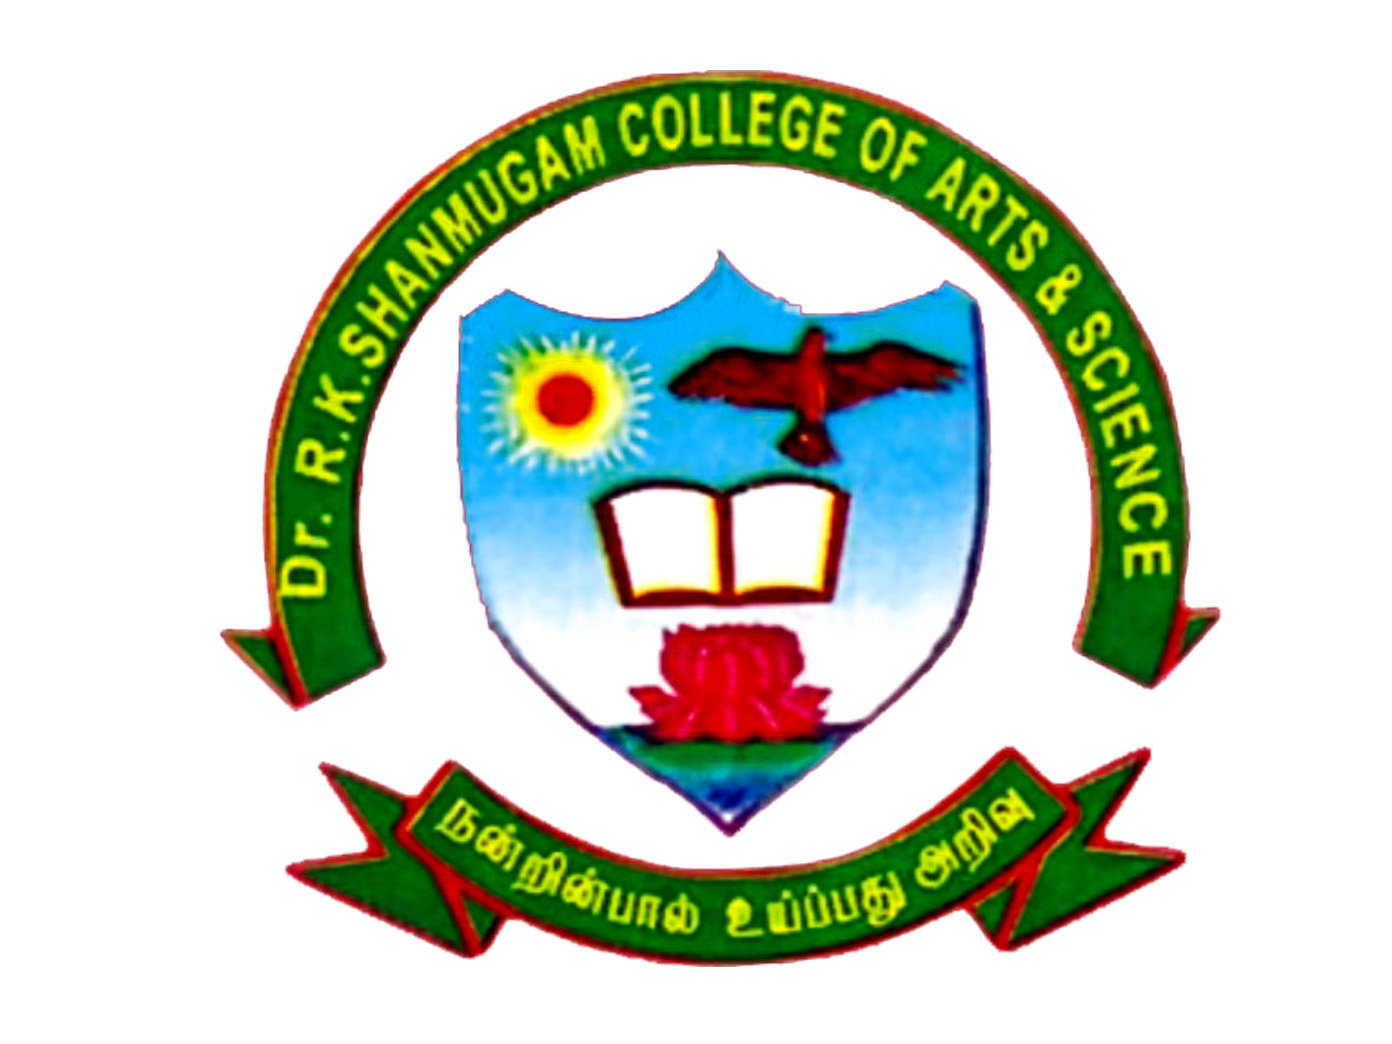 DR.R.K.SHANMUGAM COLLEGE OF ARTS AND SCIENCE